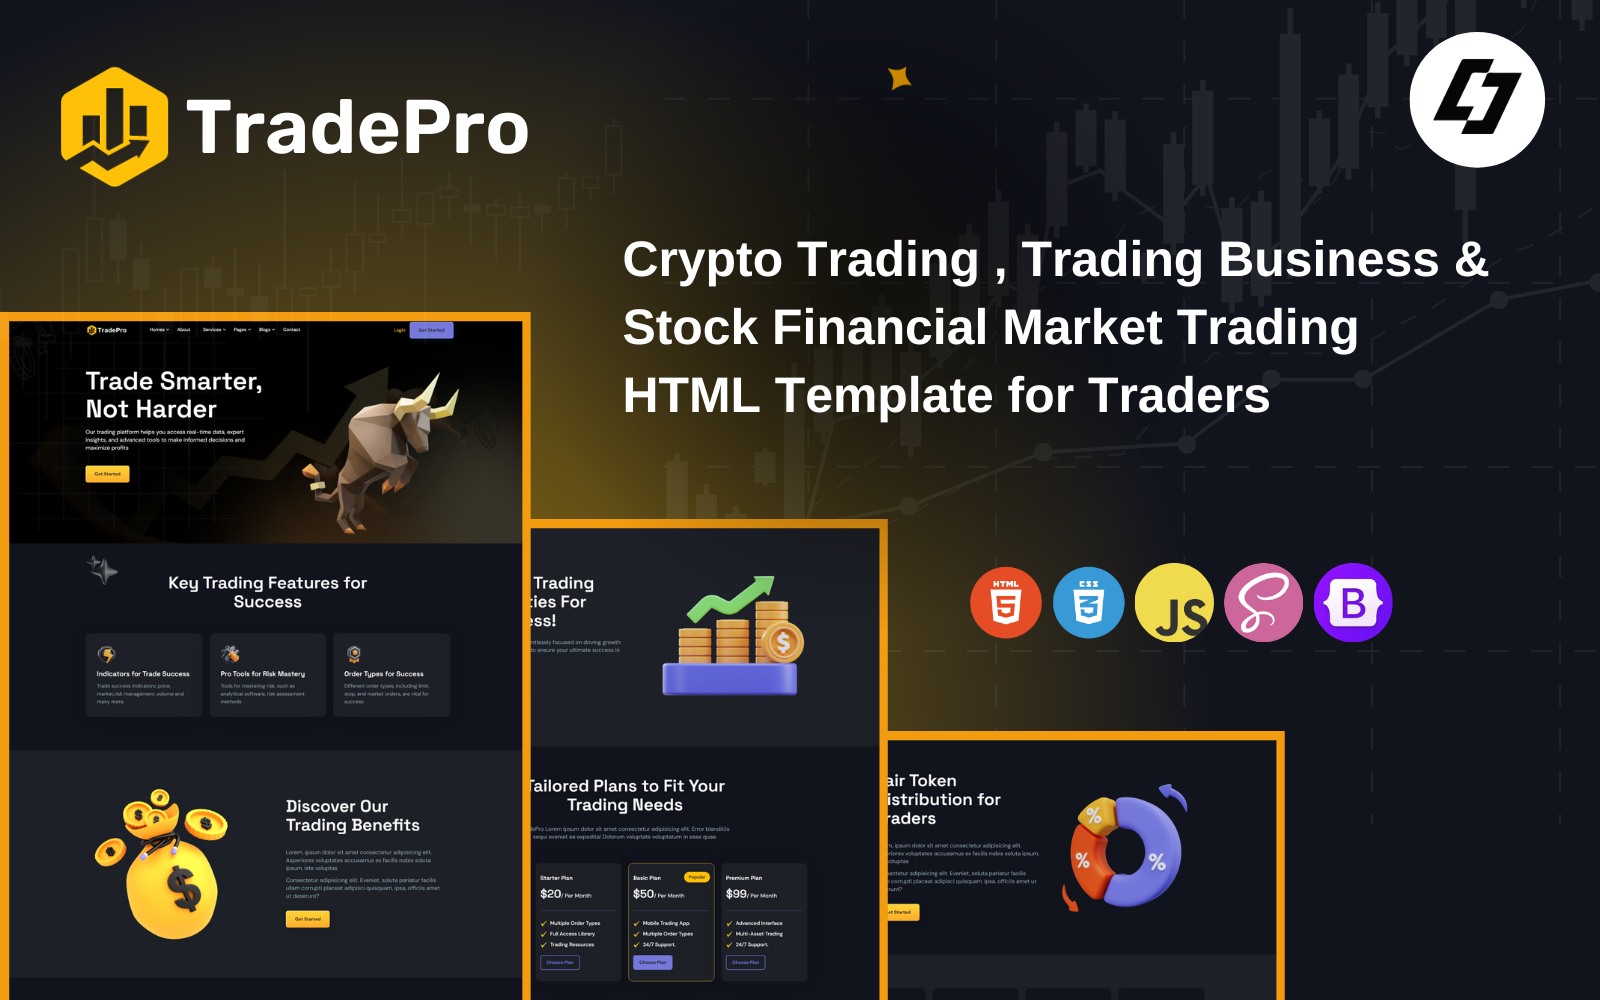 TradePro - The Ultimate HTML Template for Trading, Forex, Cryptocurrency, and Investment